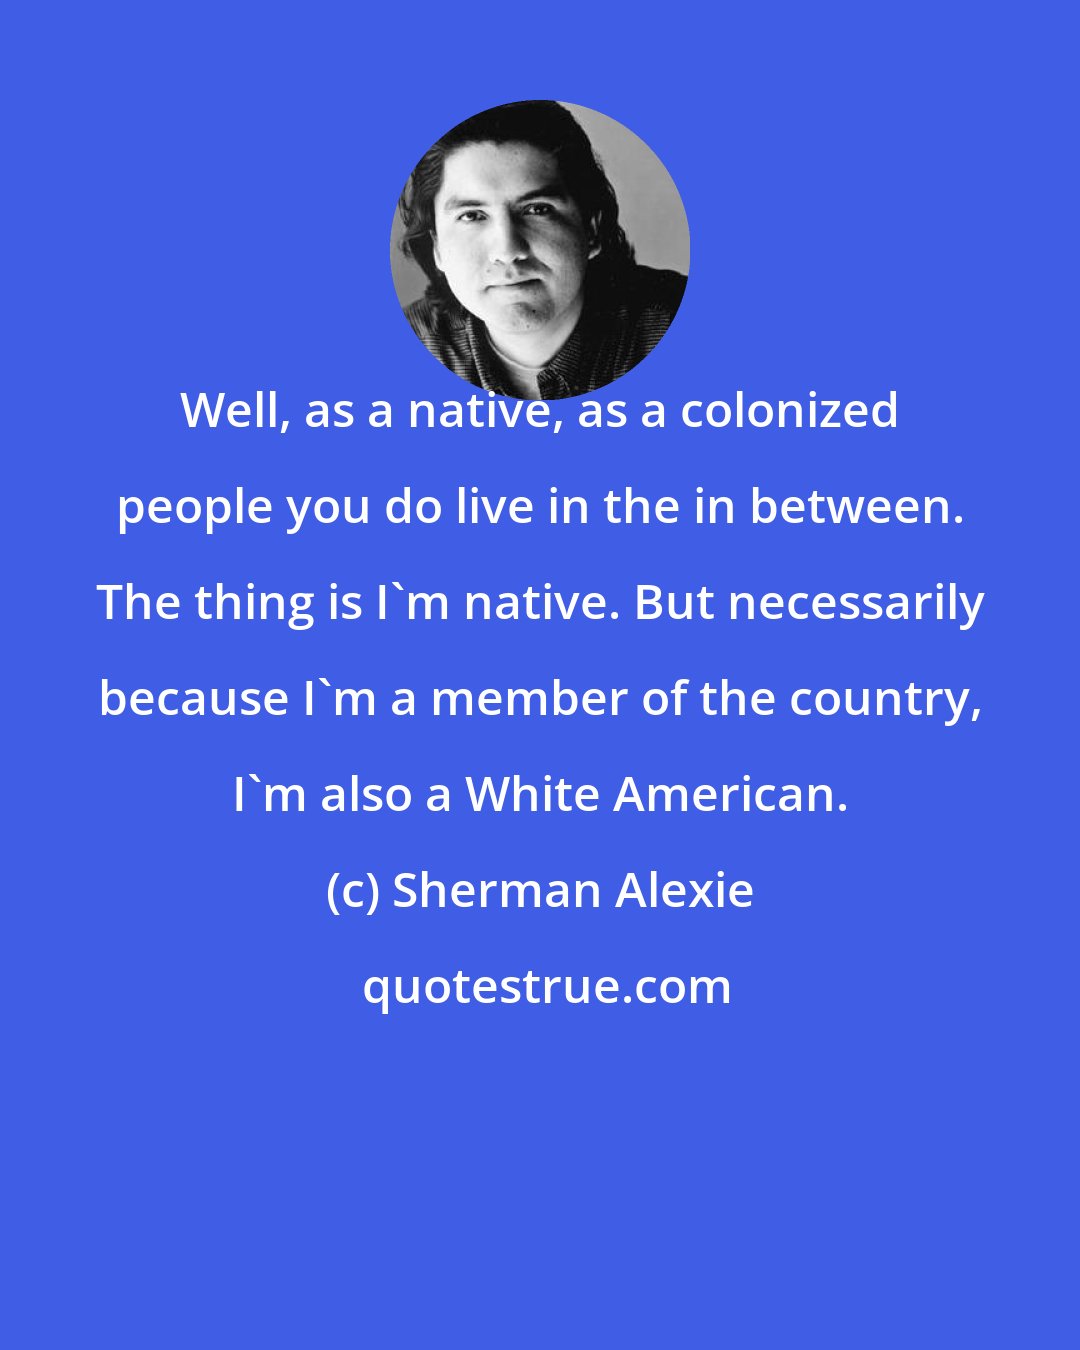 Sherman Alexie: Well, as a native, as a colonized people you do live in the in between. The thing is I'm native. But necessarily because I'm a member of the country, I'm also a White American.